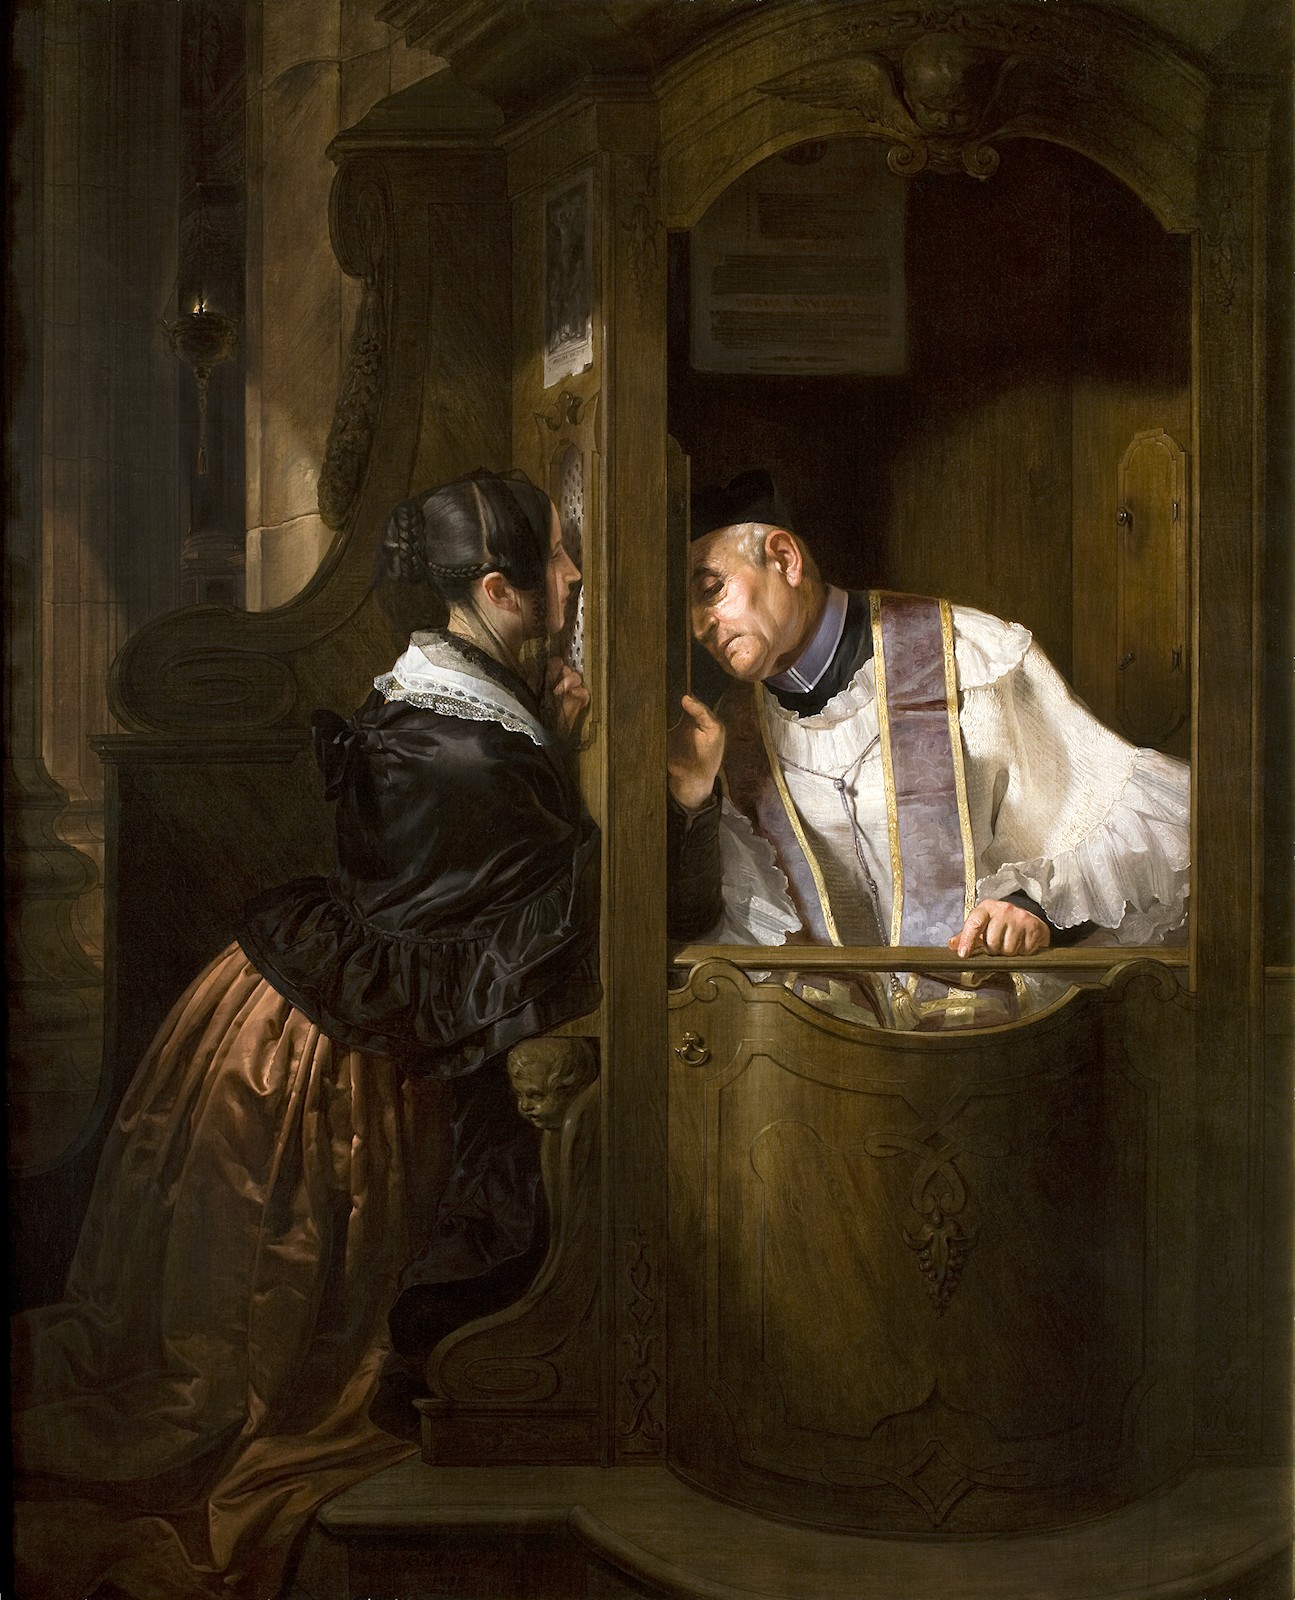 The Advantages of Frequent Confession